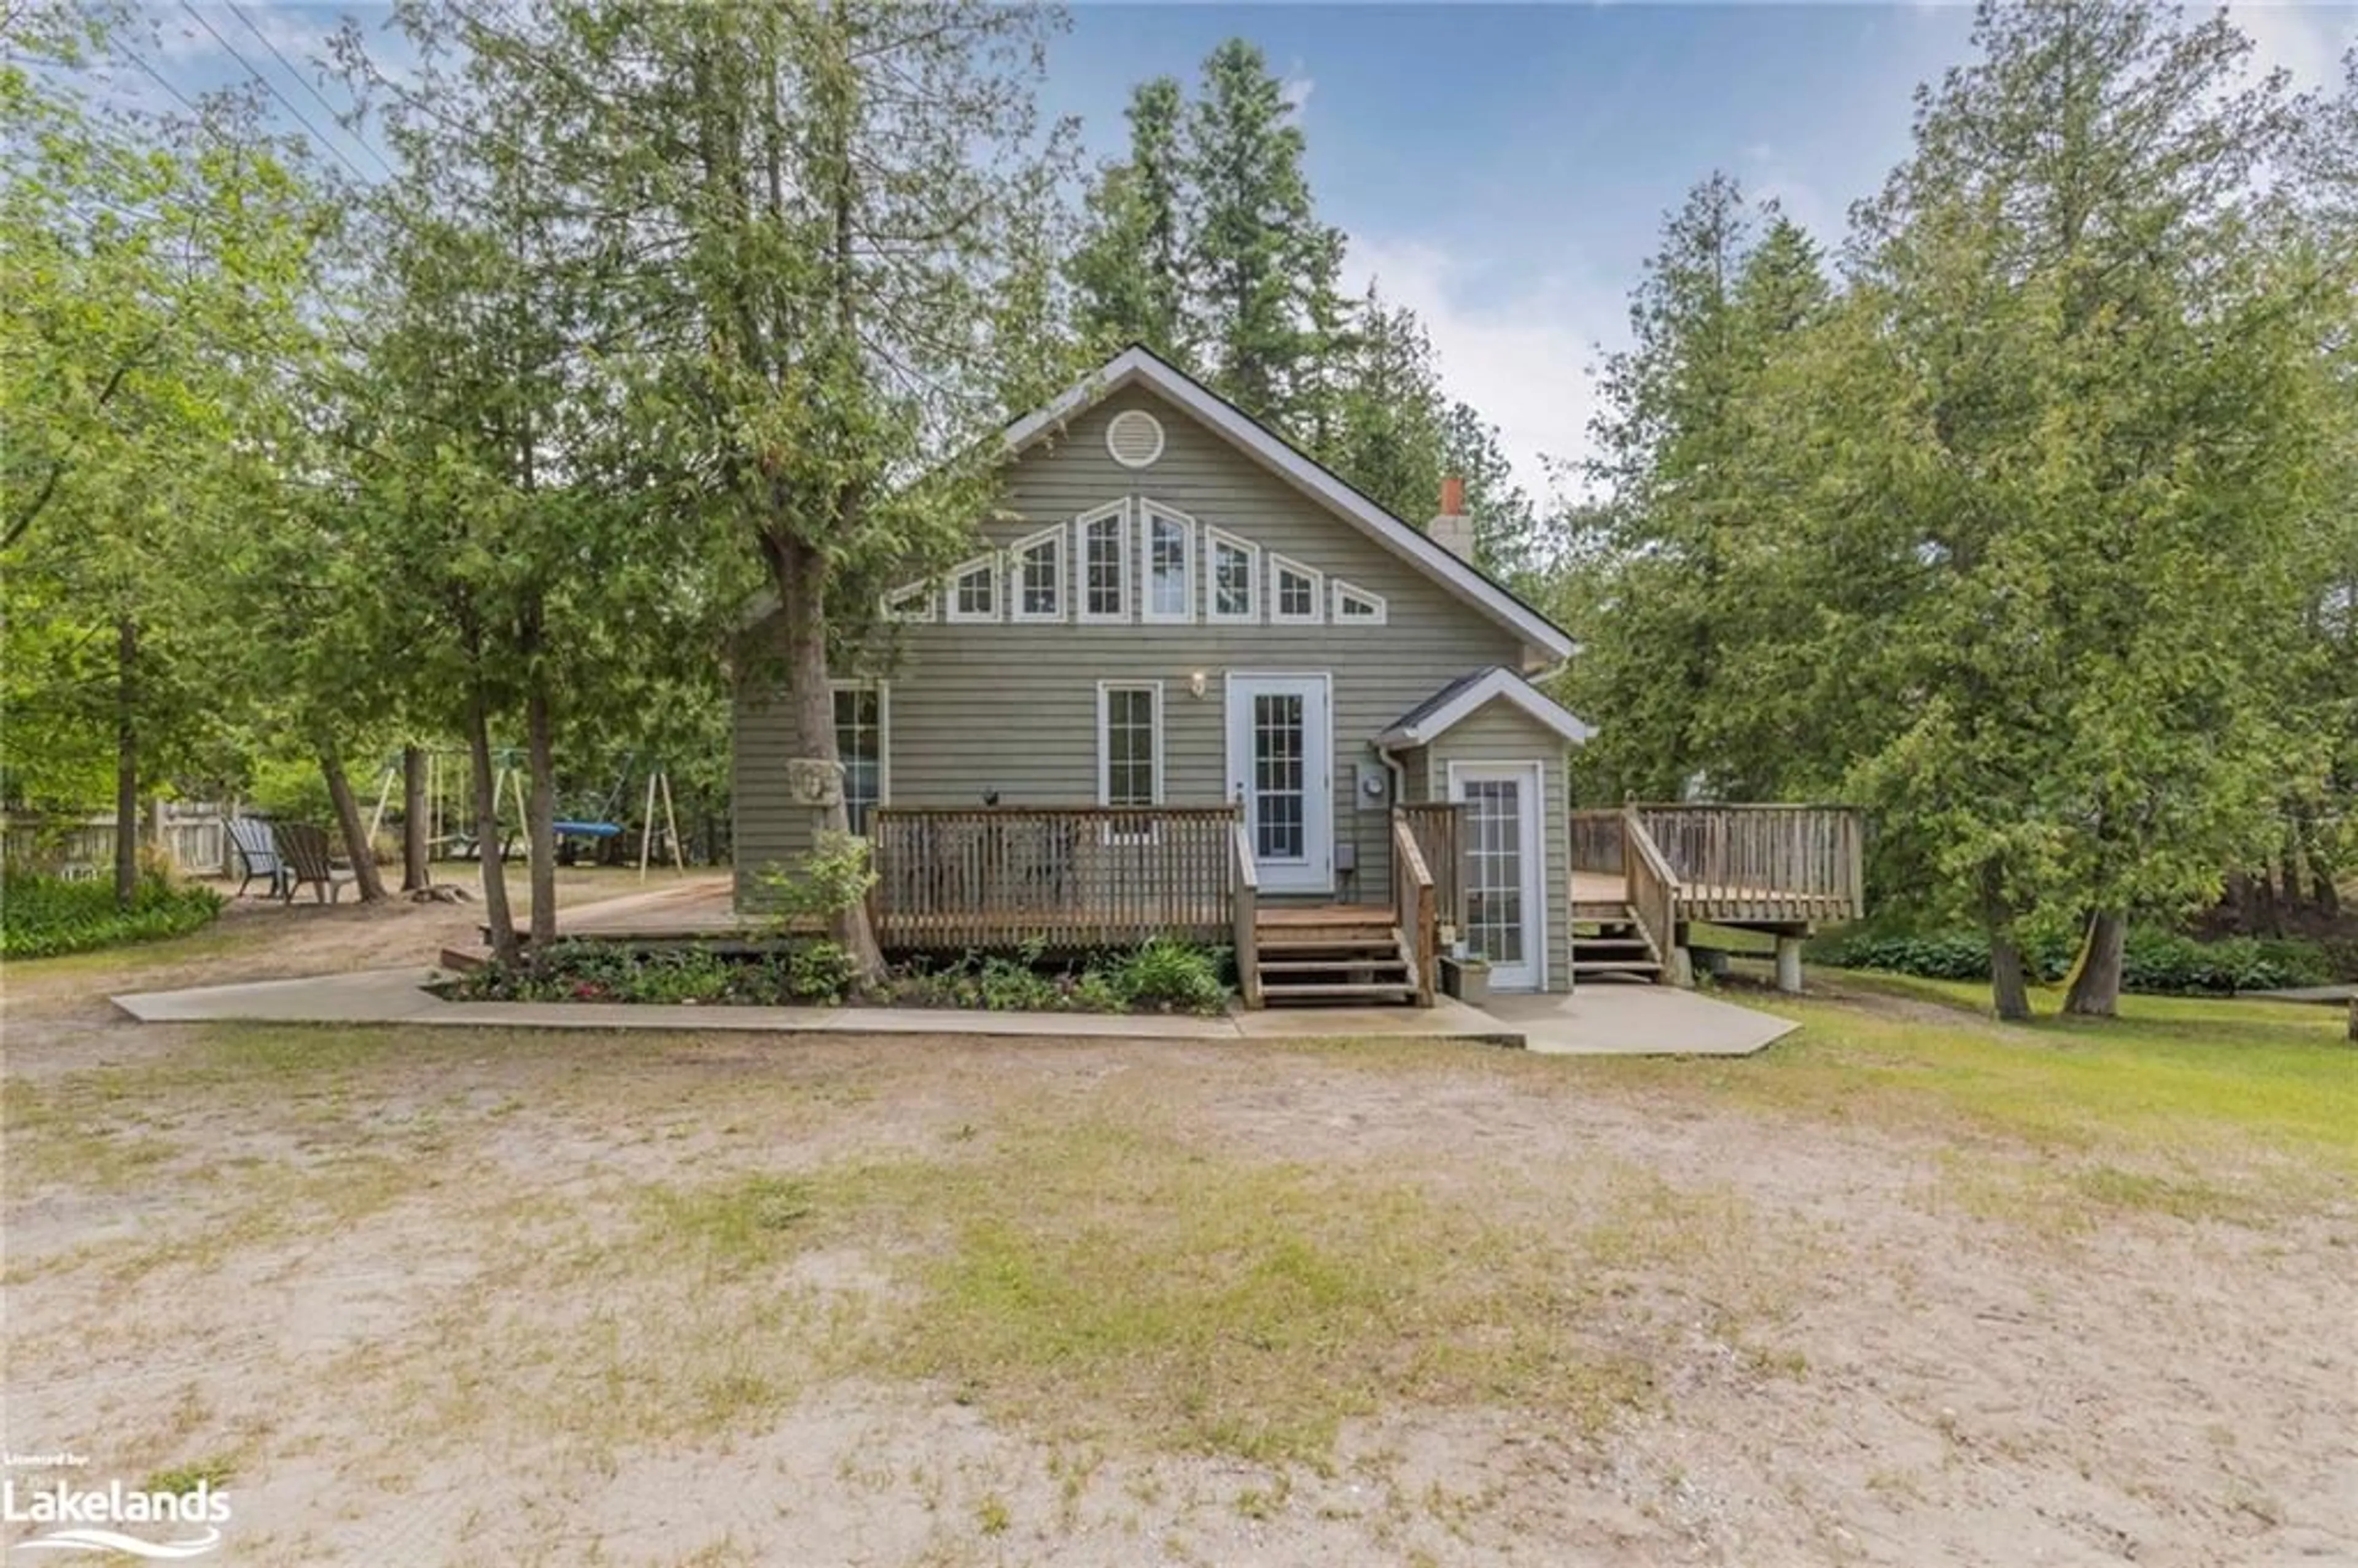 Cottage for 840 River Rd, Wasaga Beach Ontario L9Z 2P3